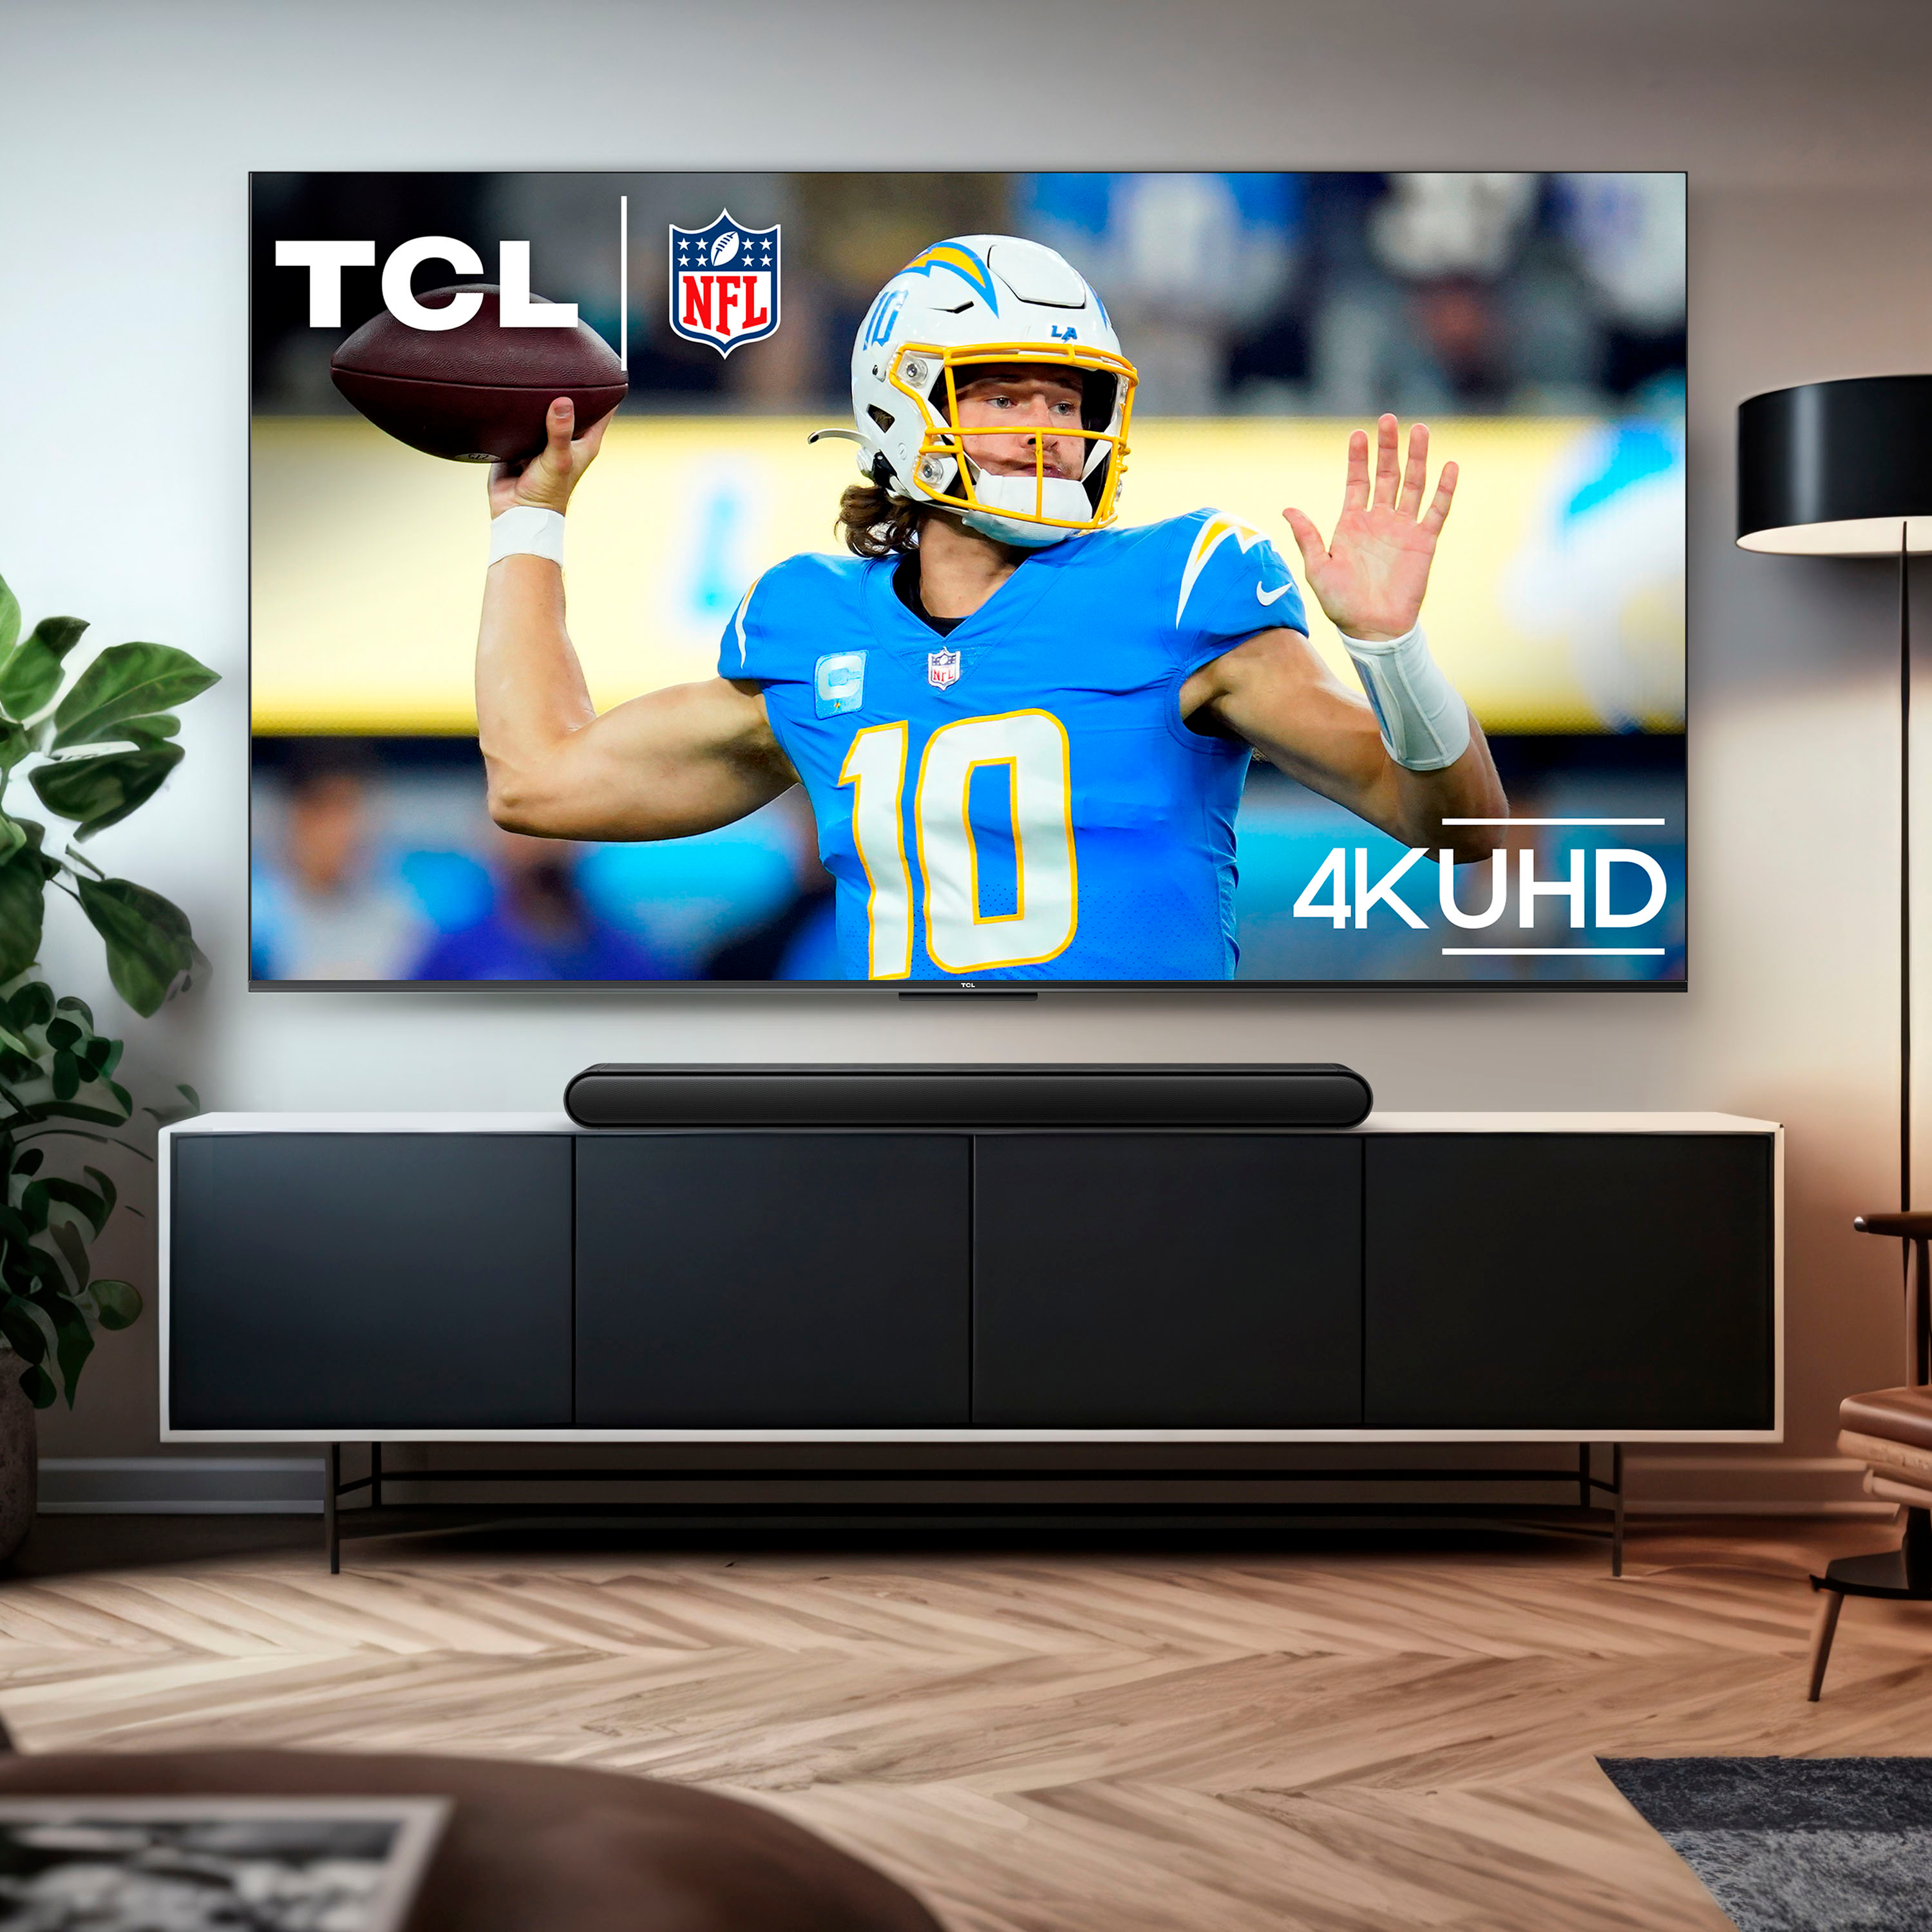 TCL 50S450G 50 inch Class S4 Series LED HDR 4K Google Smart TV